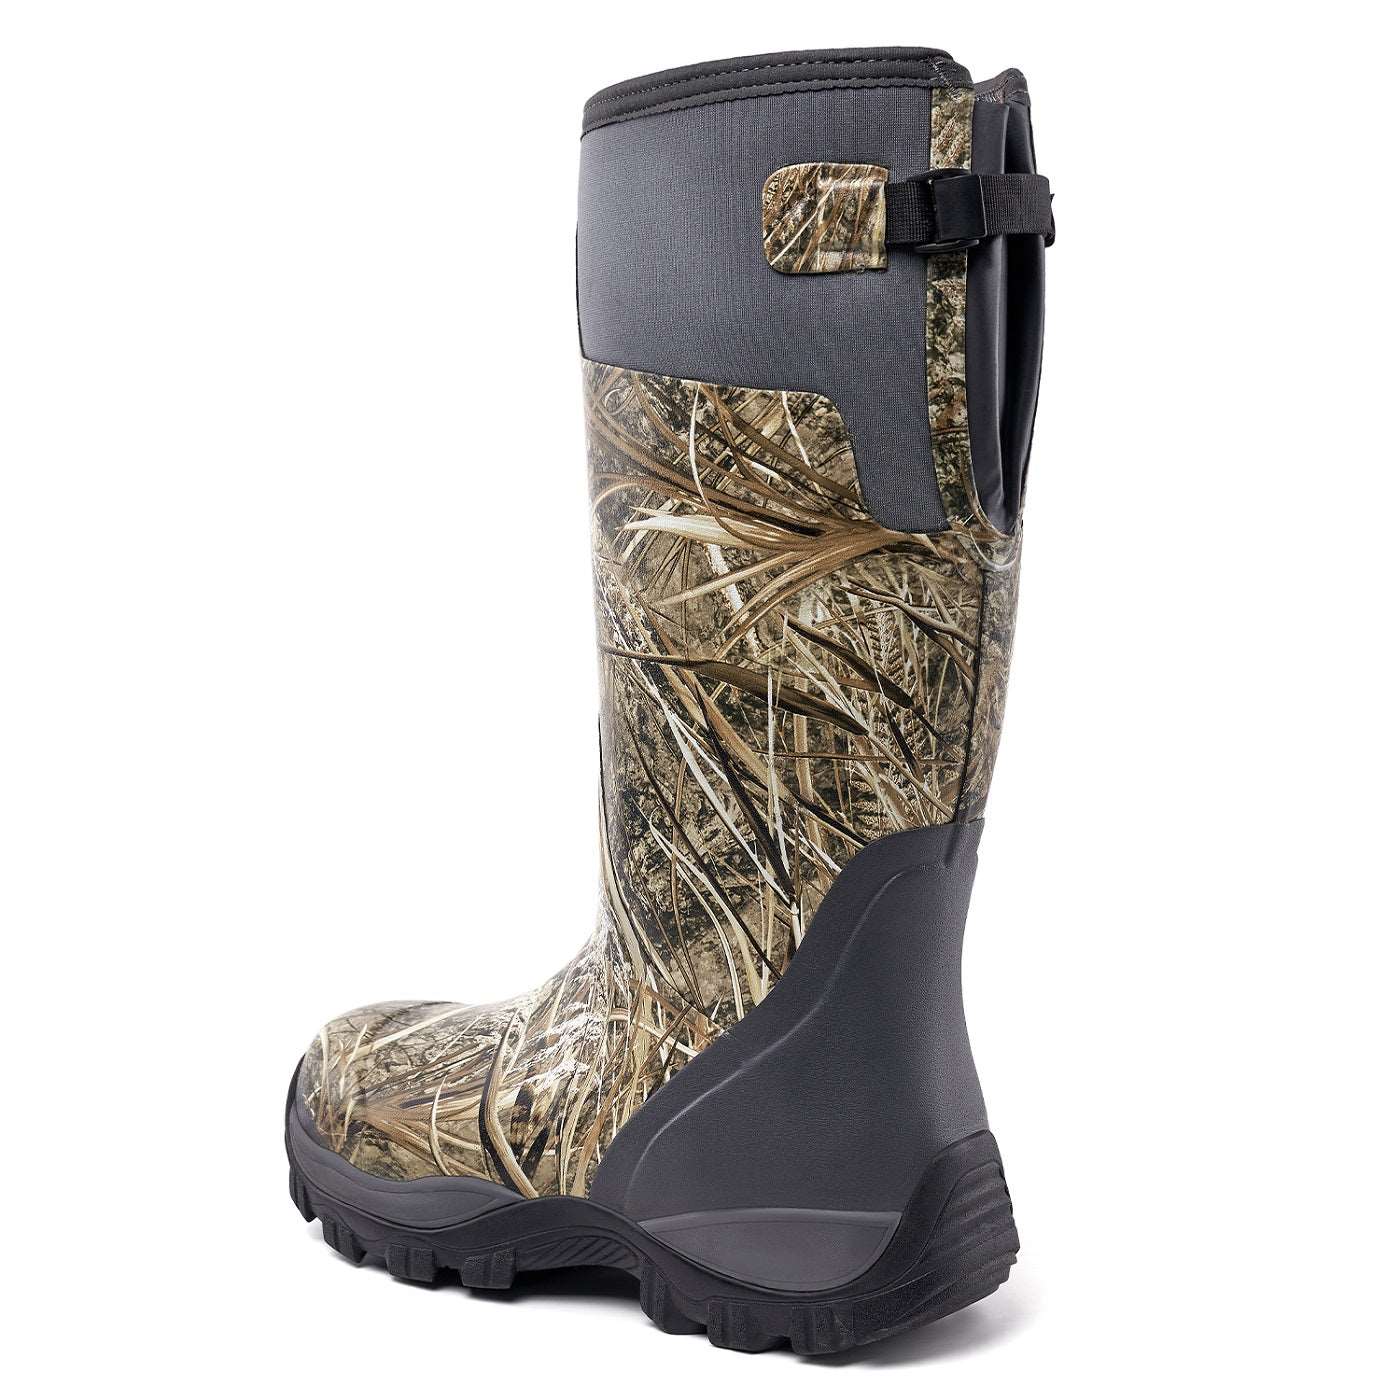 Trudave Real Reed Waterproof Hunting Boots for Men&Women